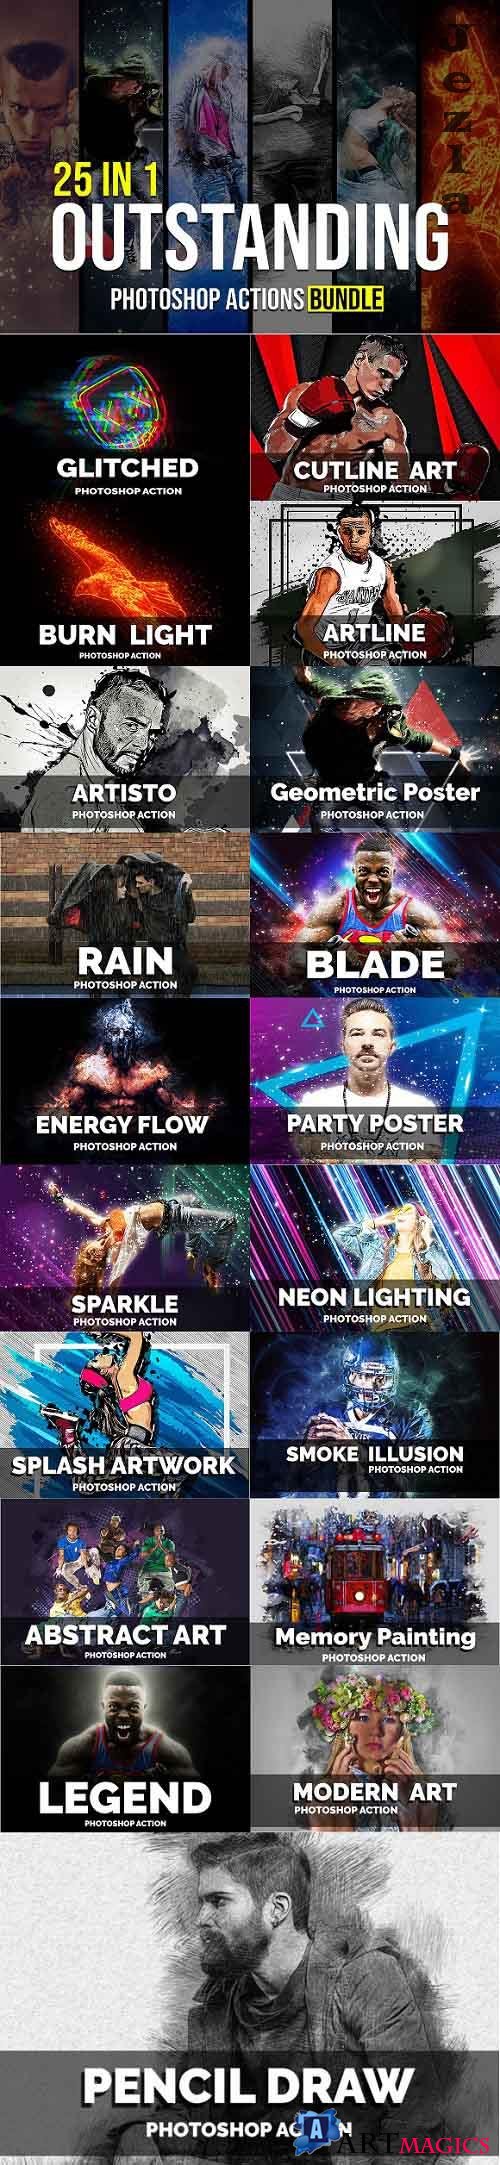 25 In 1 Outstanding Photoshop Actions Bundle - 5299135